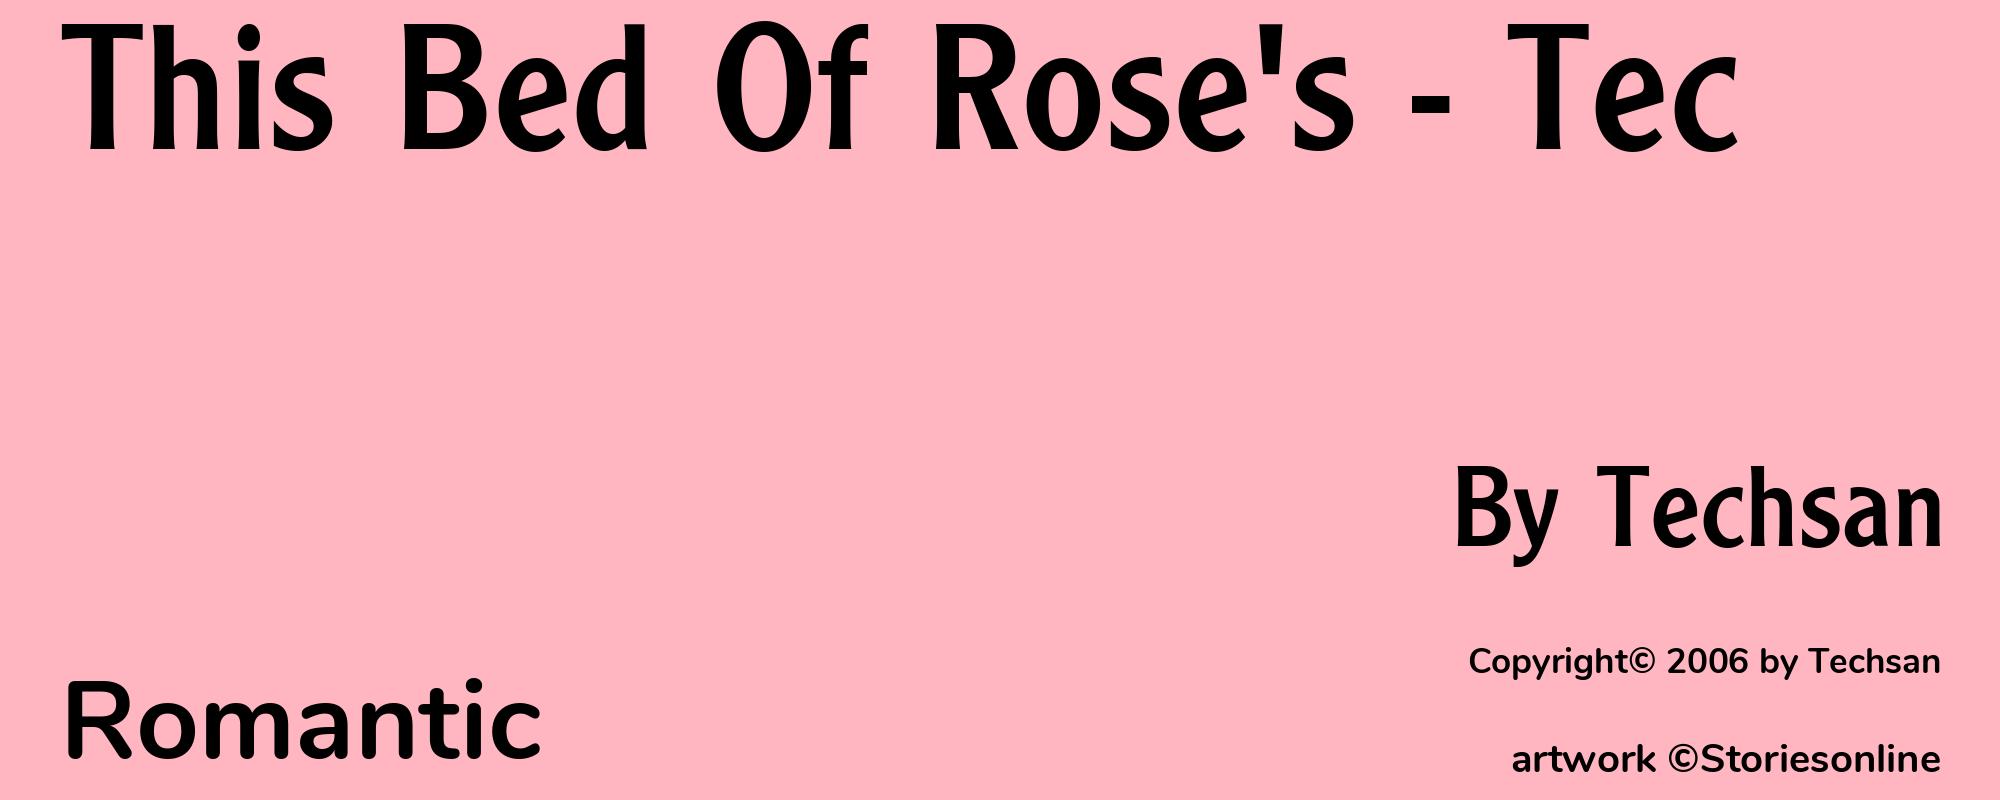 This Bed Of Rose's - Tec - Cover